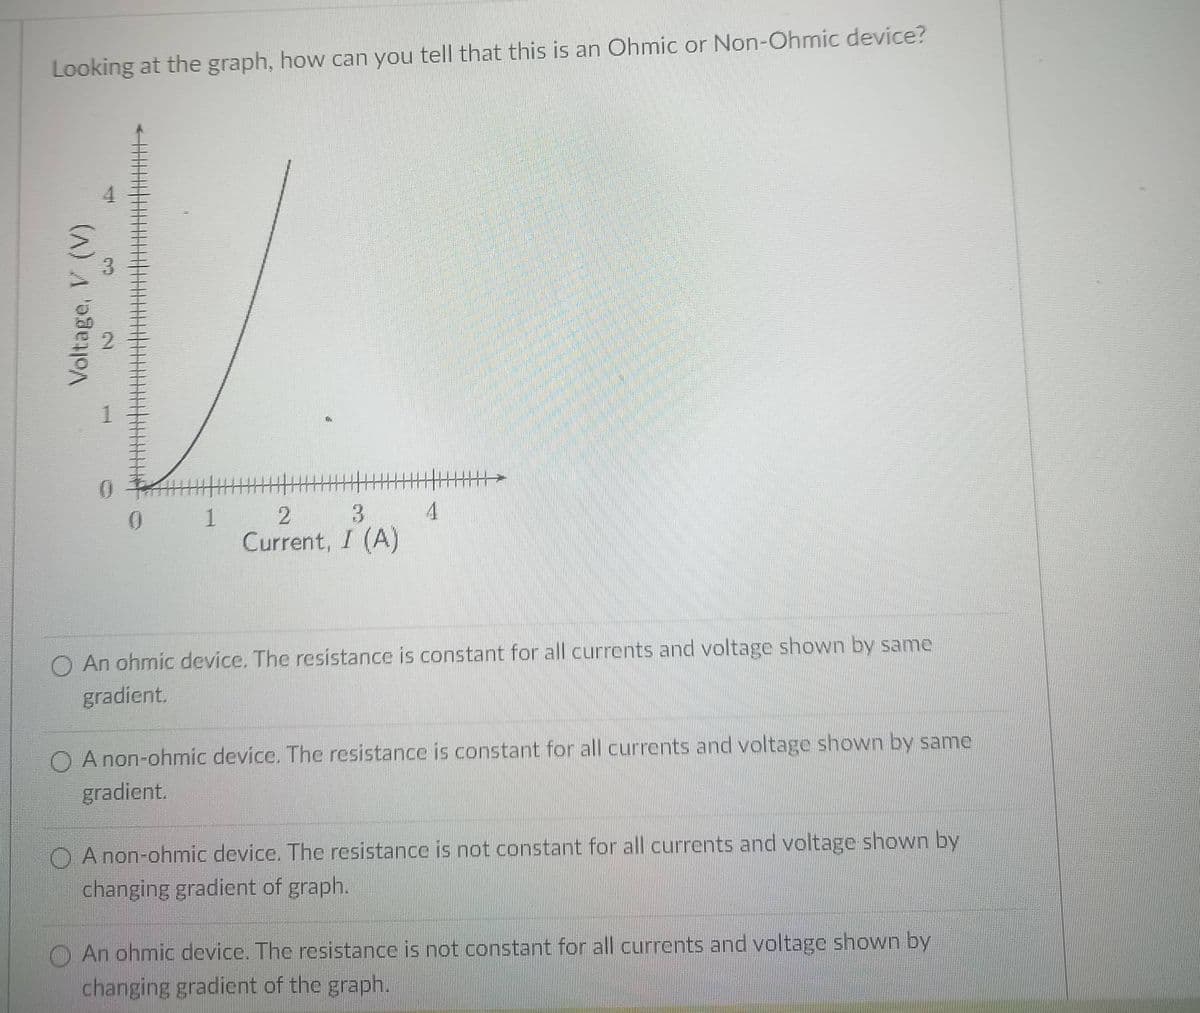 Looking at the graph, how can you tell that this is an Ohmic or Non-Ohmic device?
4.
3
0.
1
3.
Current, I (A)
O An ohmic device. The resistance is constant for all currents and voltage shown by same
gradient.
O A non-ohmic device. The resistance is constant for all currents and voltage shown by same
gradient.
O A non-ohmic device. The resistance is not constant for all currents and voltage shown by
changing gradient of graph.
O An ohmic device. The resistance is not constant for all currents and voltage shown by
changing gradient of the graph.
Voltage, V (V)
2.
